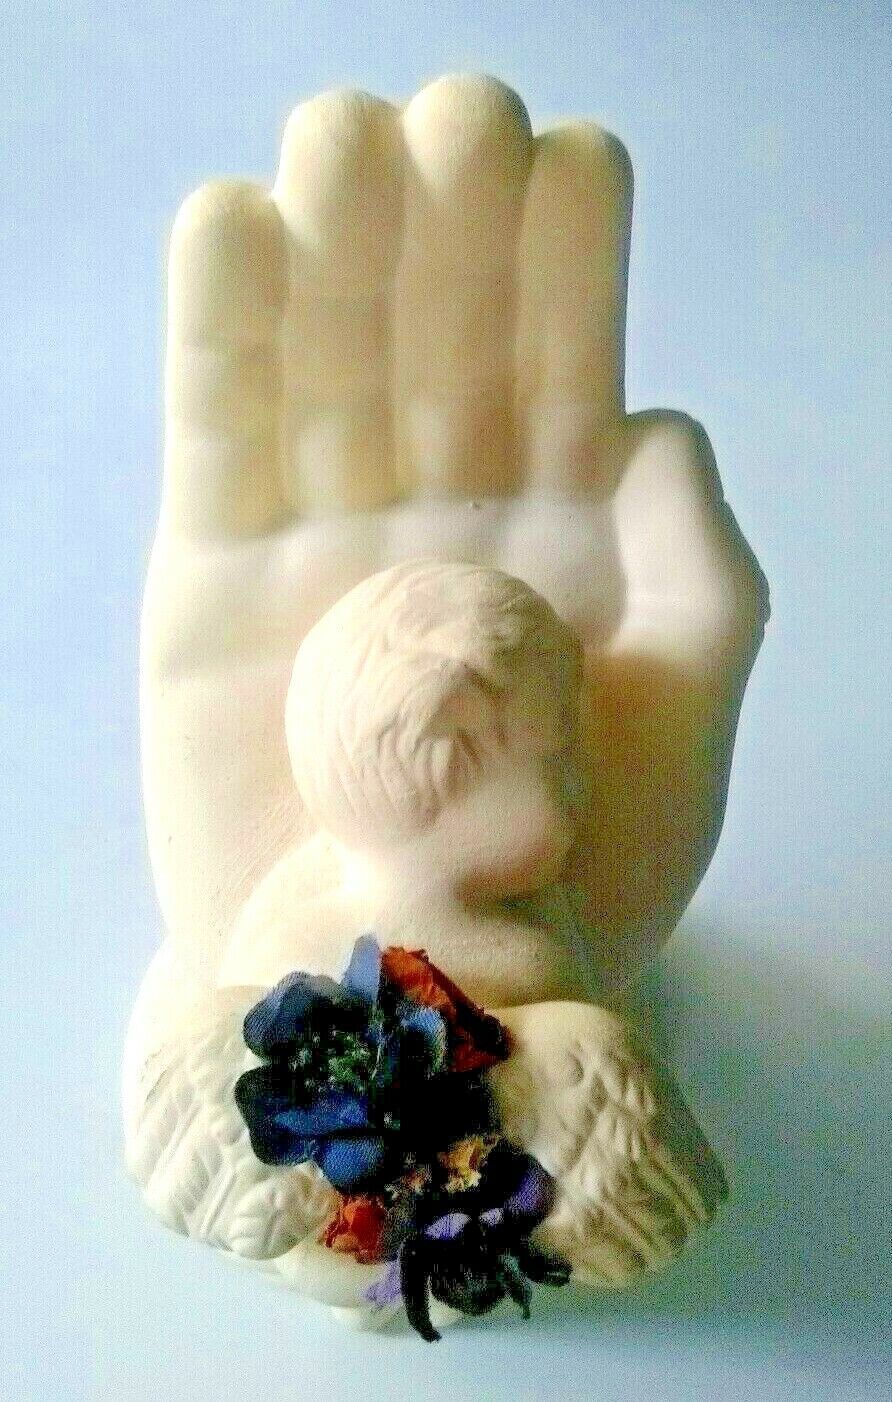 Primary image for Angel Sleeping "Safe In The Hand Of God" Figurine 6" Tall